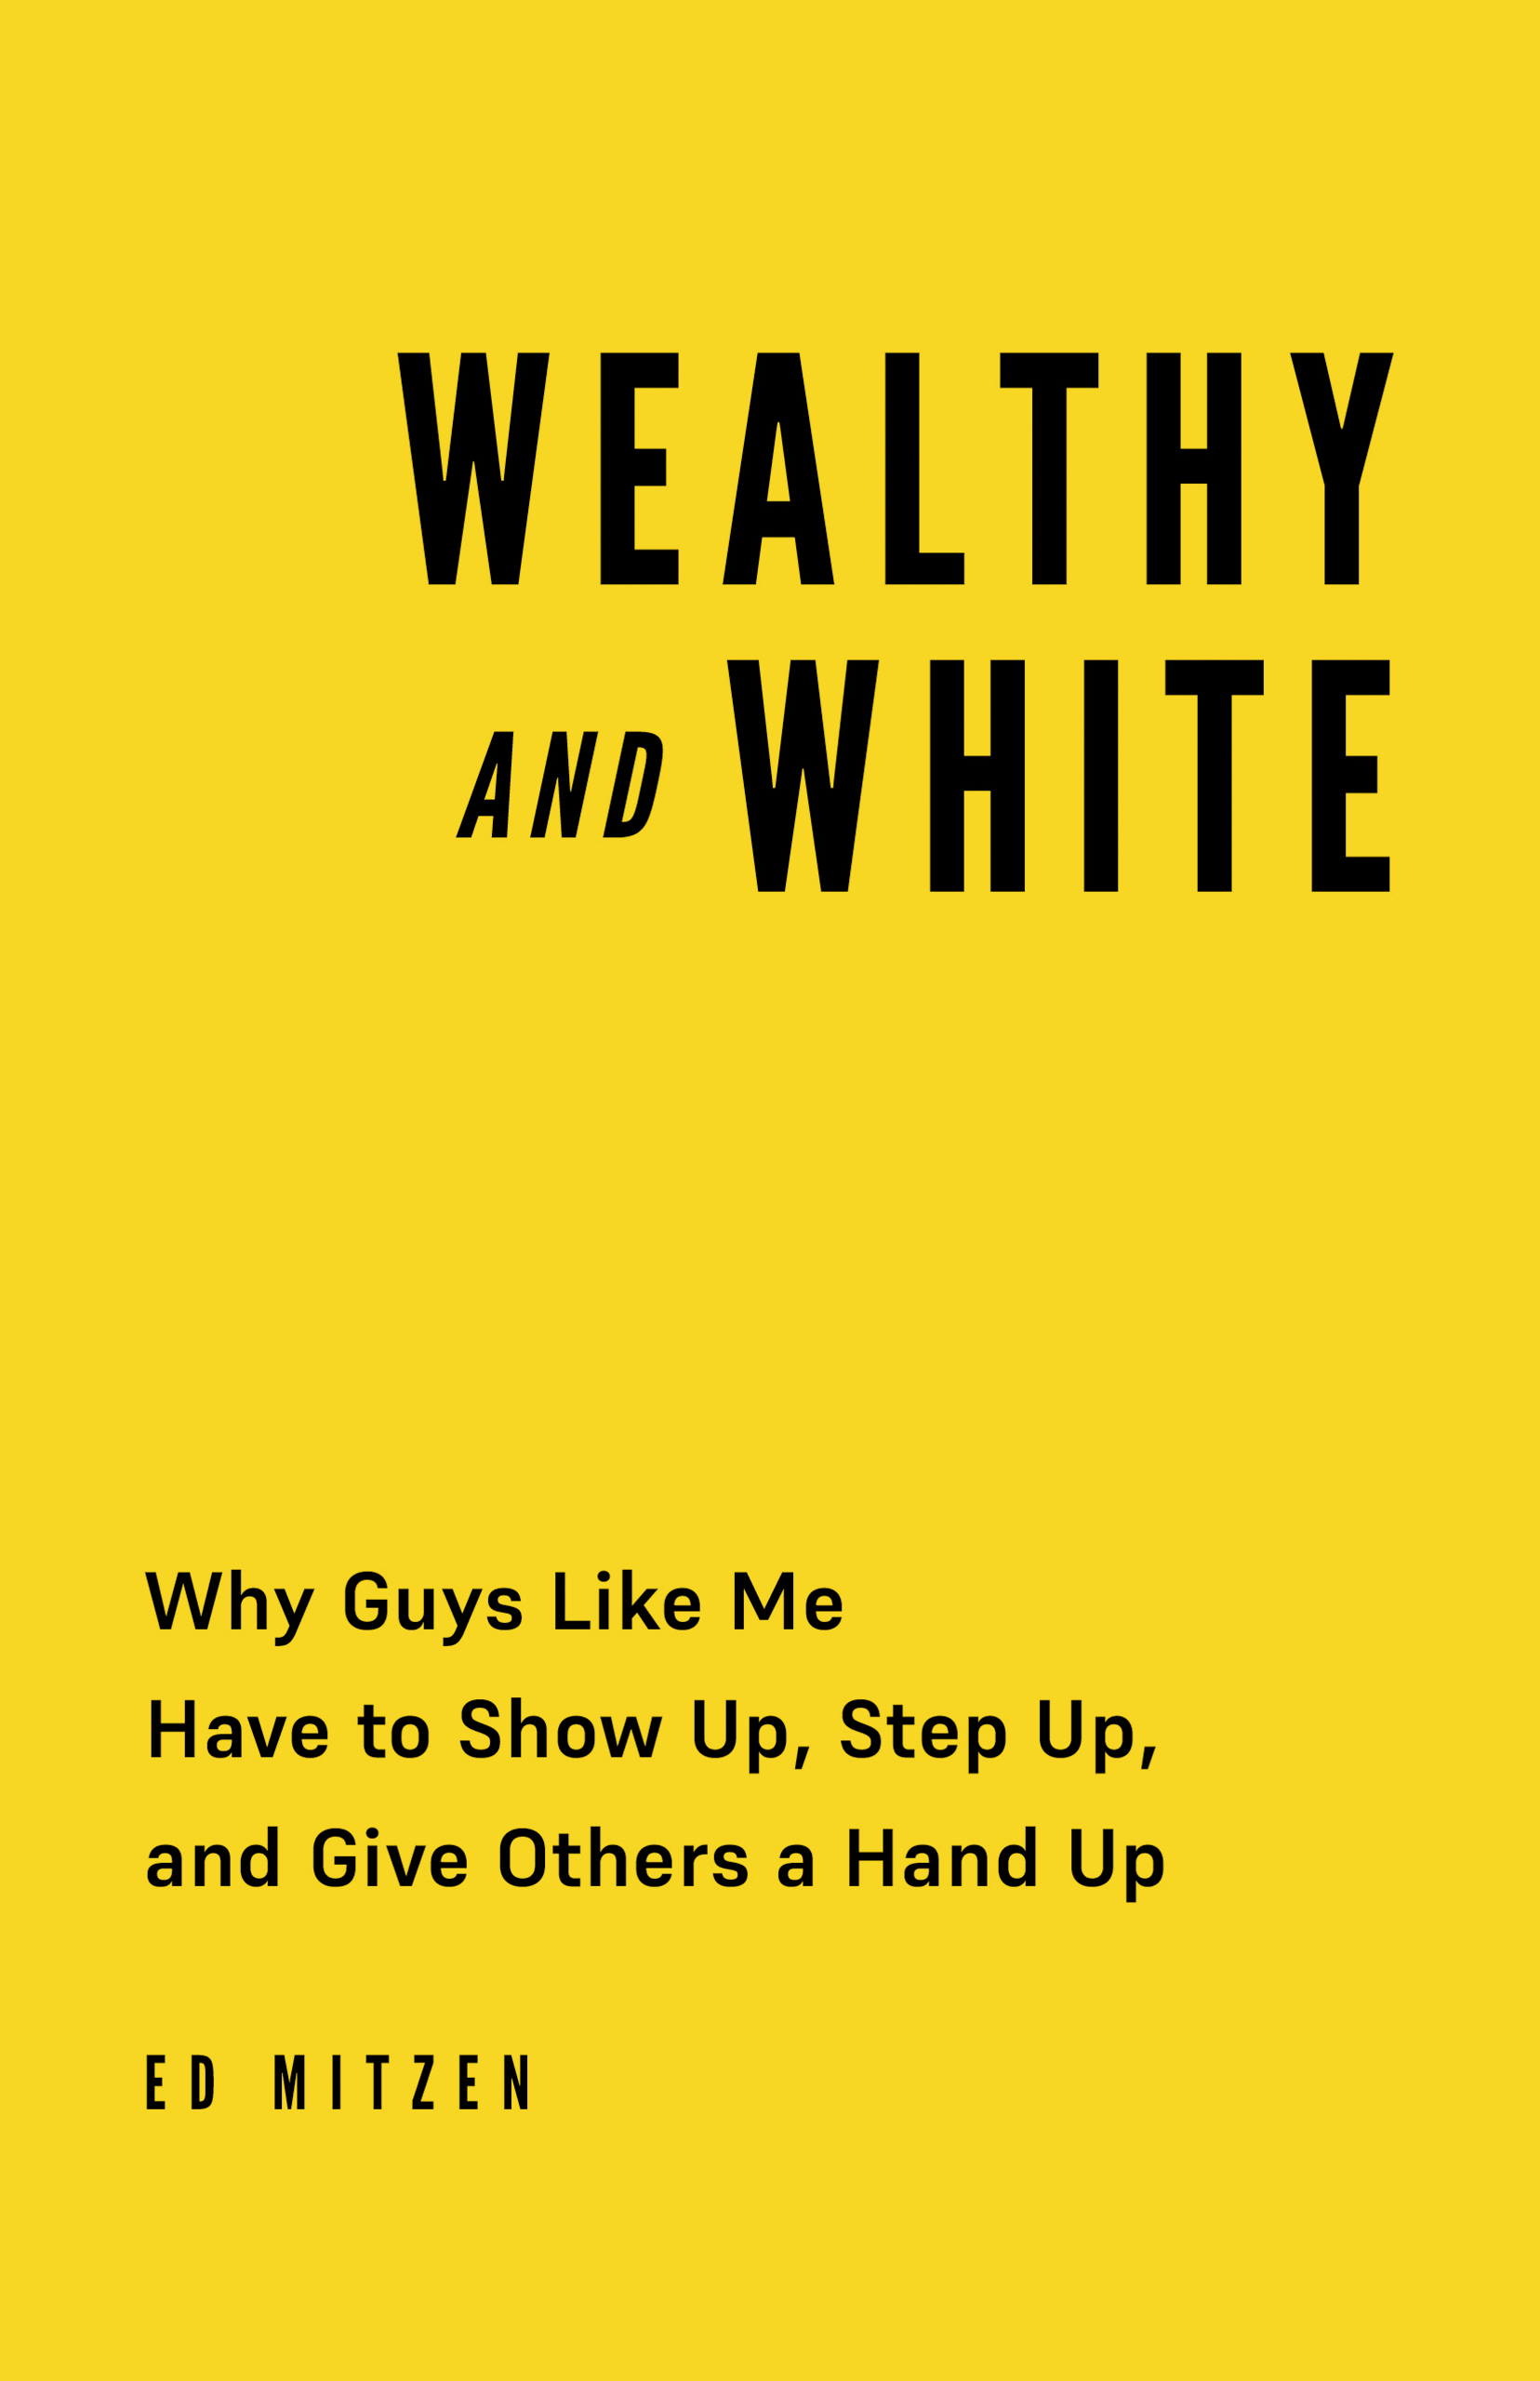 Wealthy and White